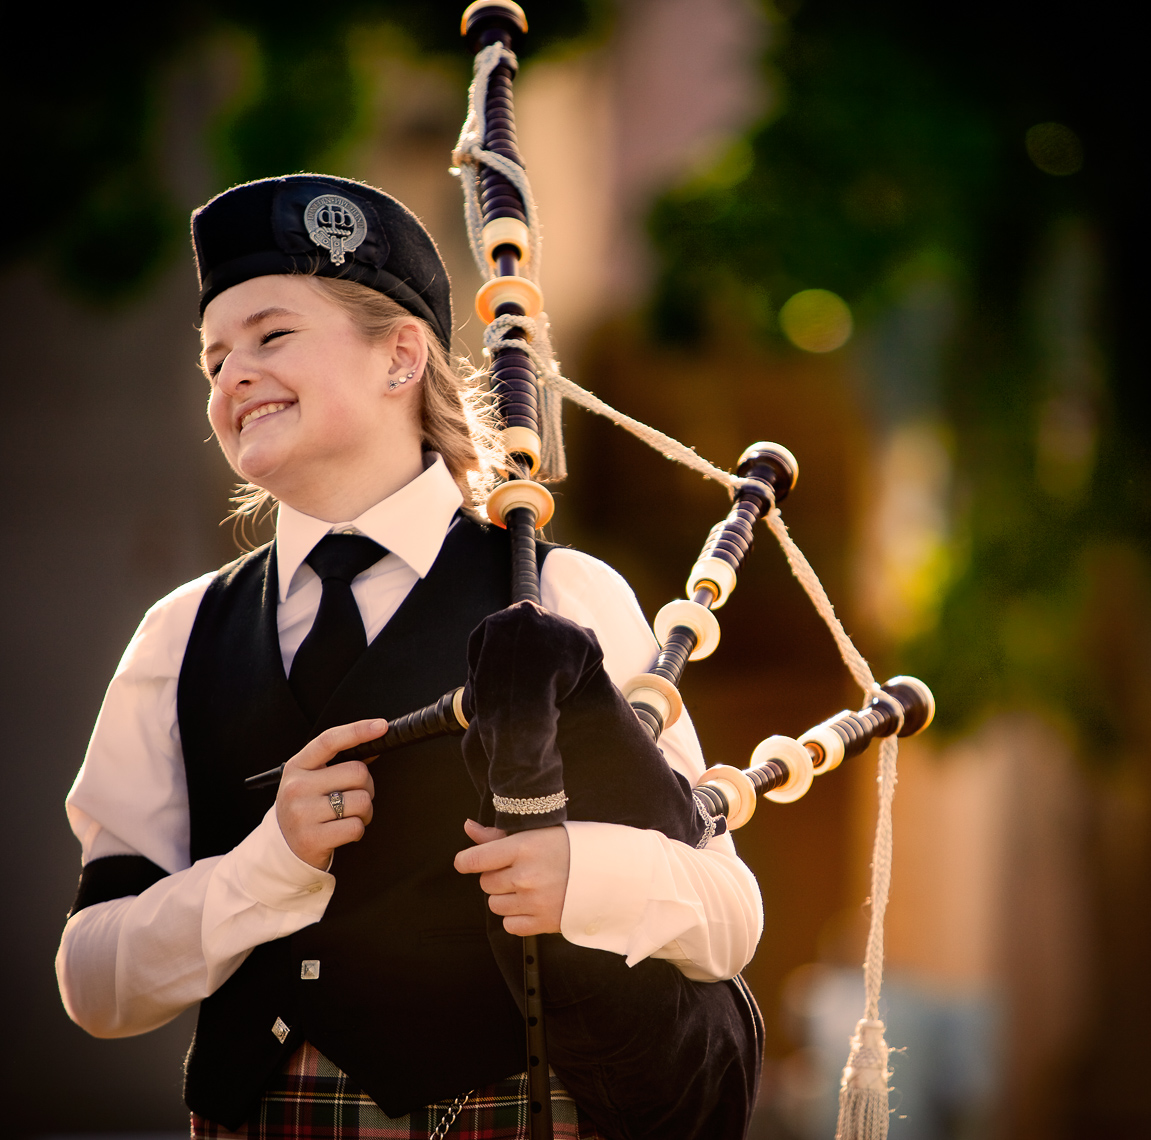 post bagpipe competition delight